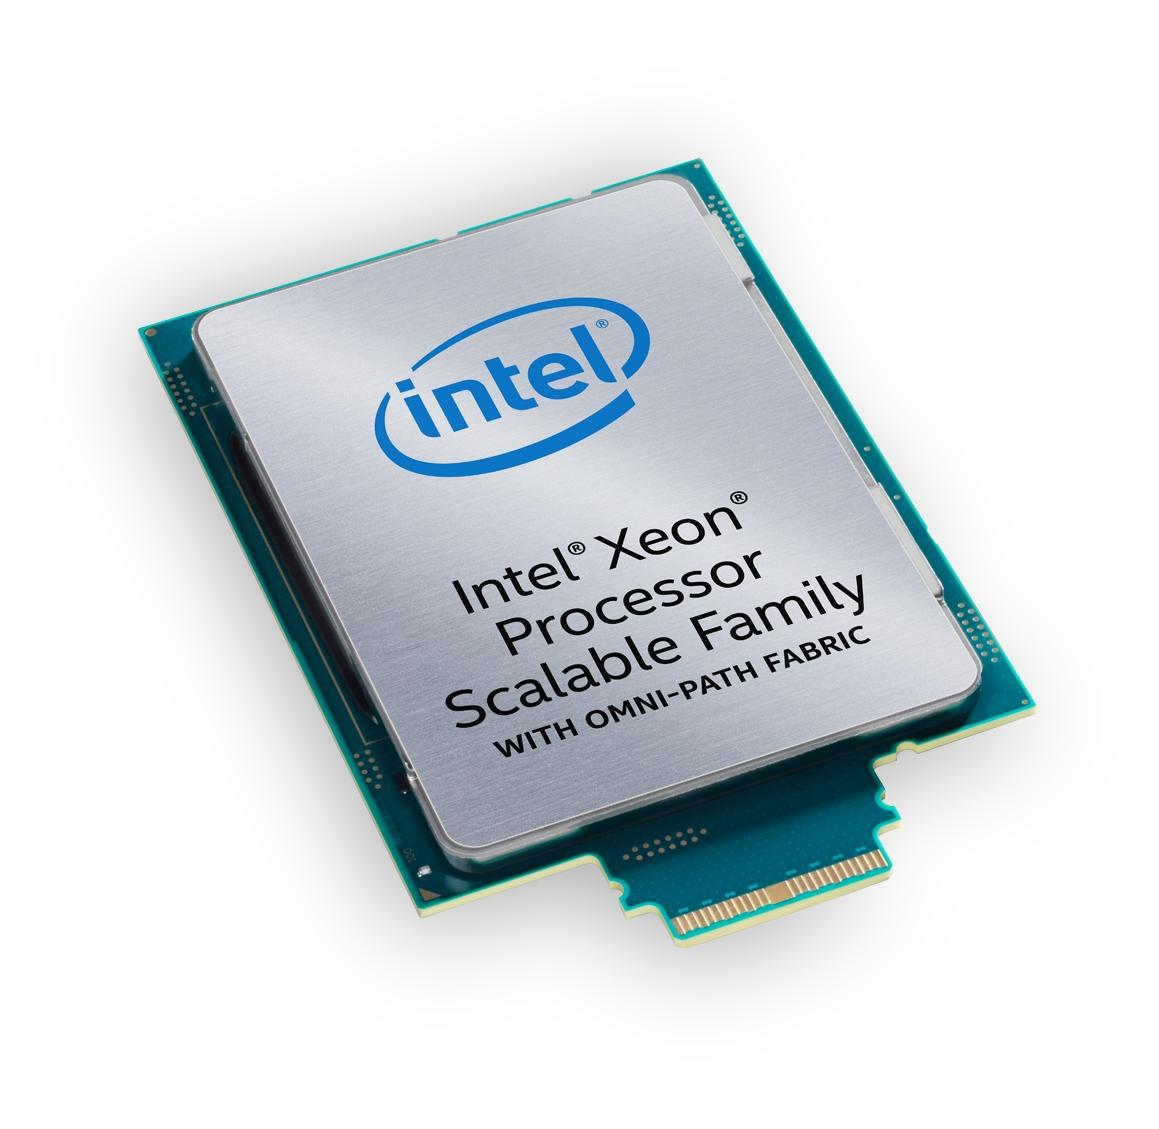 Are Xeon Processors Good for Gaming?